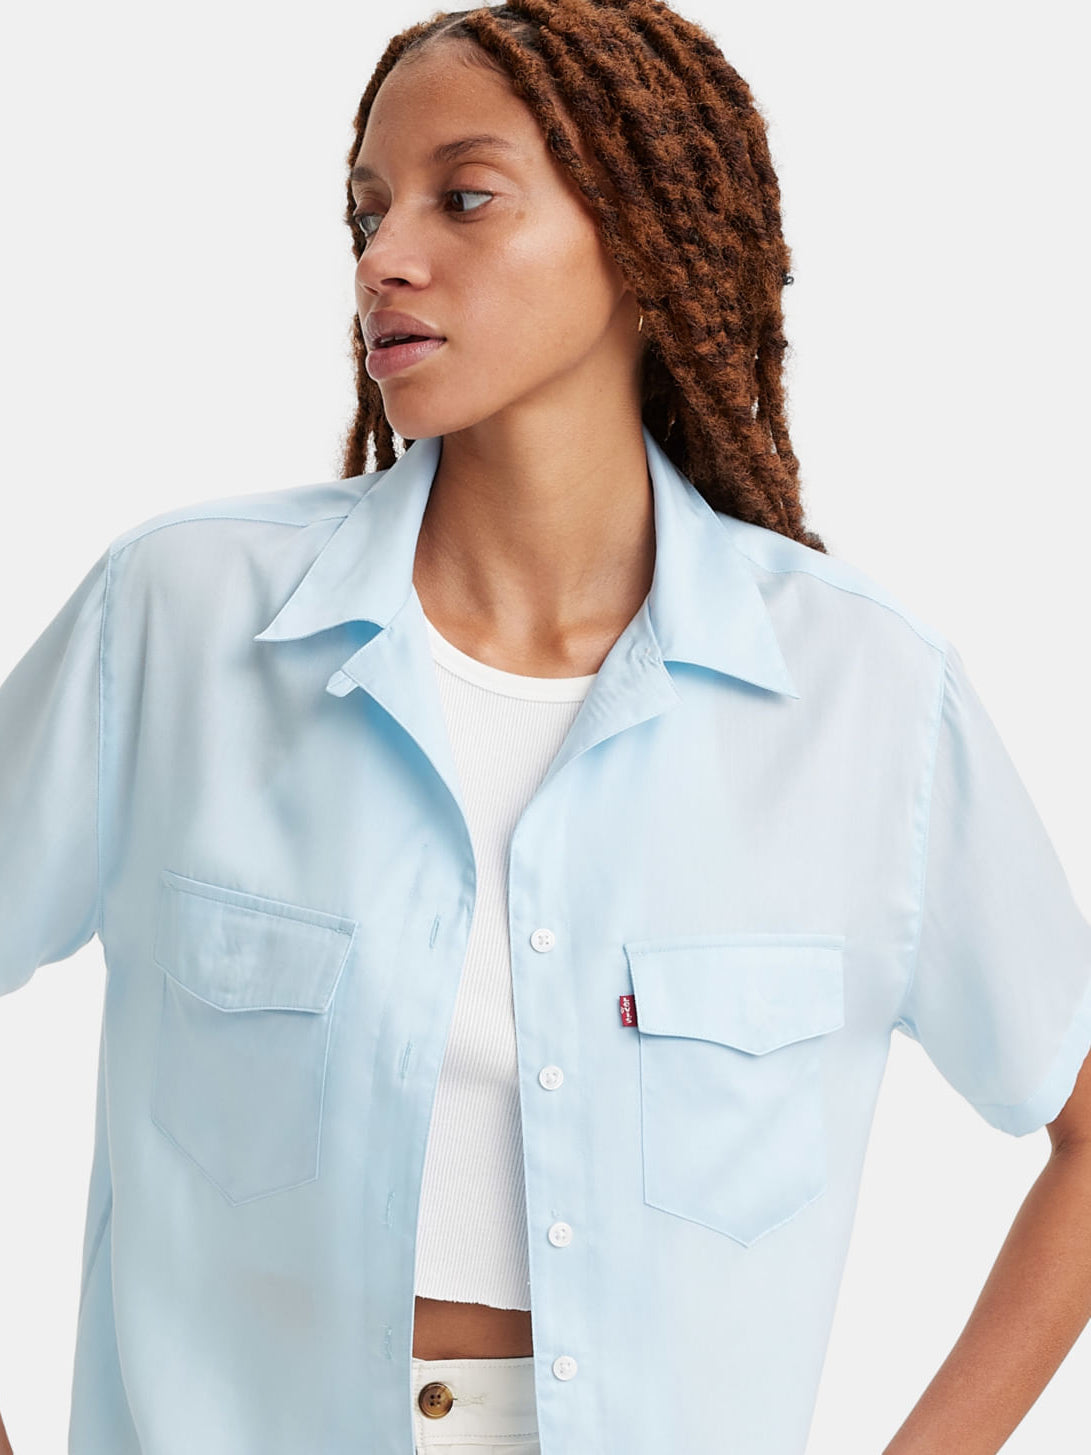 Ember Short Sleeve Bowling Shirt in Omphalodes Blue